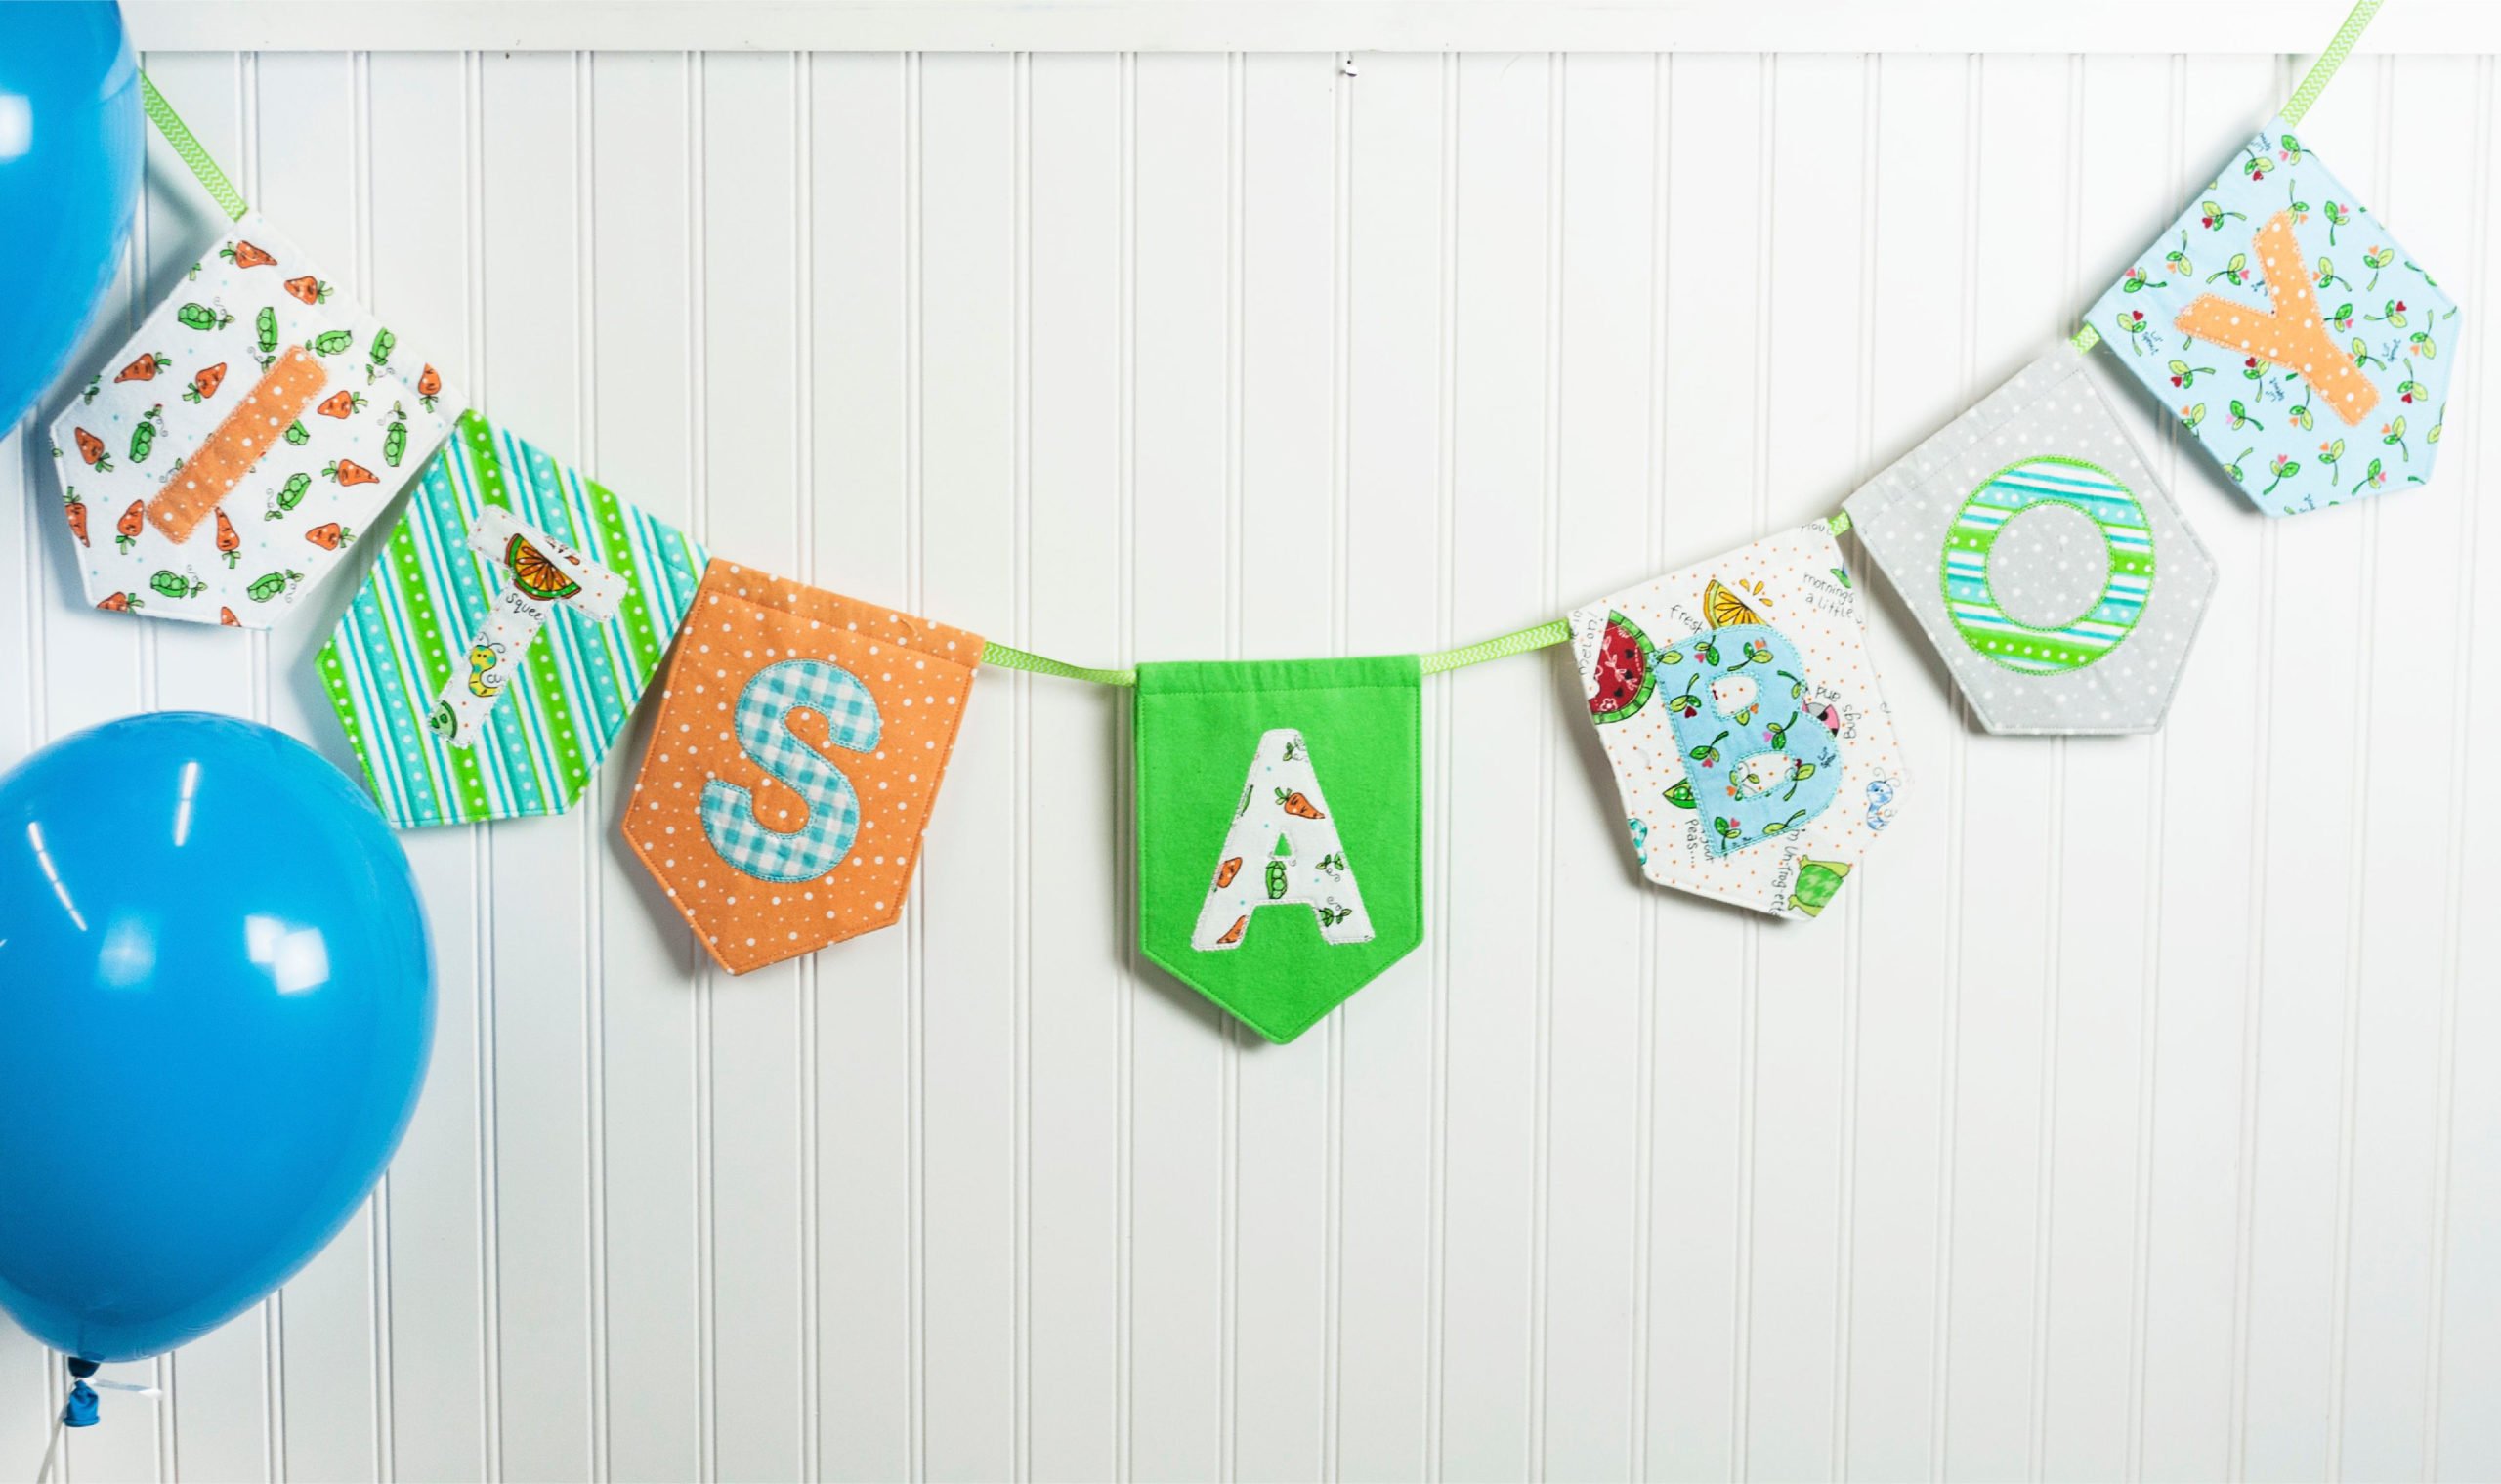 Baby nursery decor with pennants and banners for sewing and machine embroidery